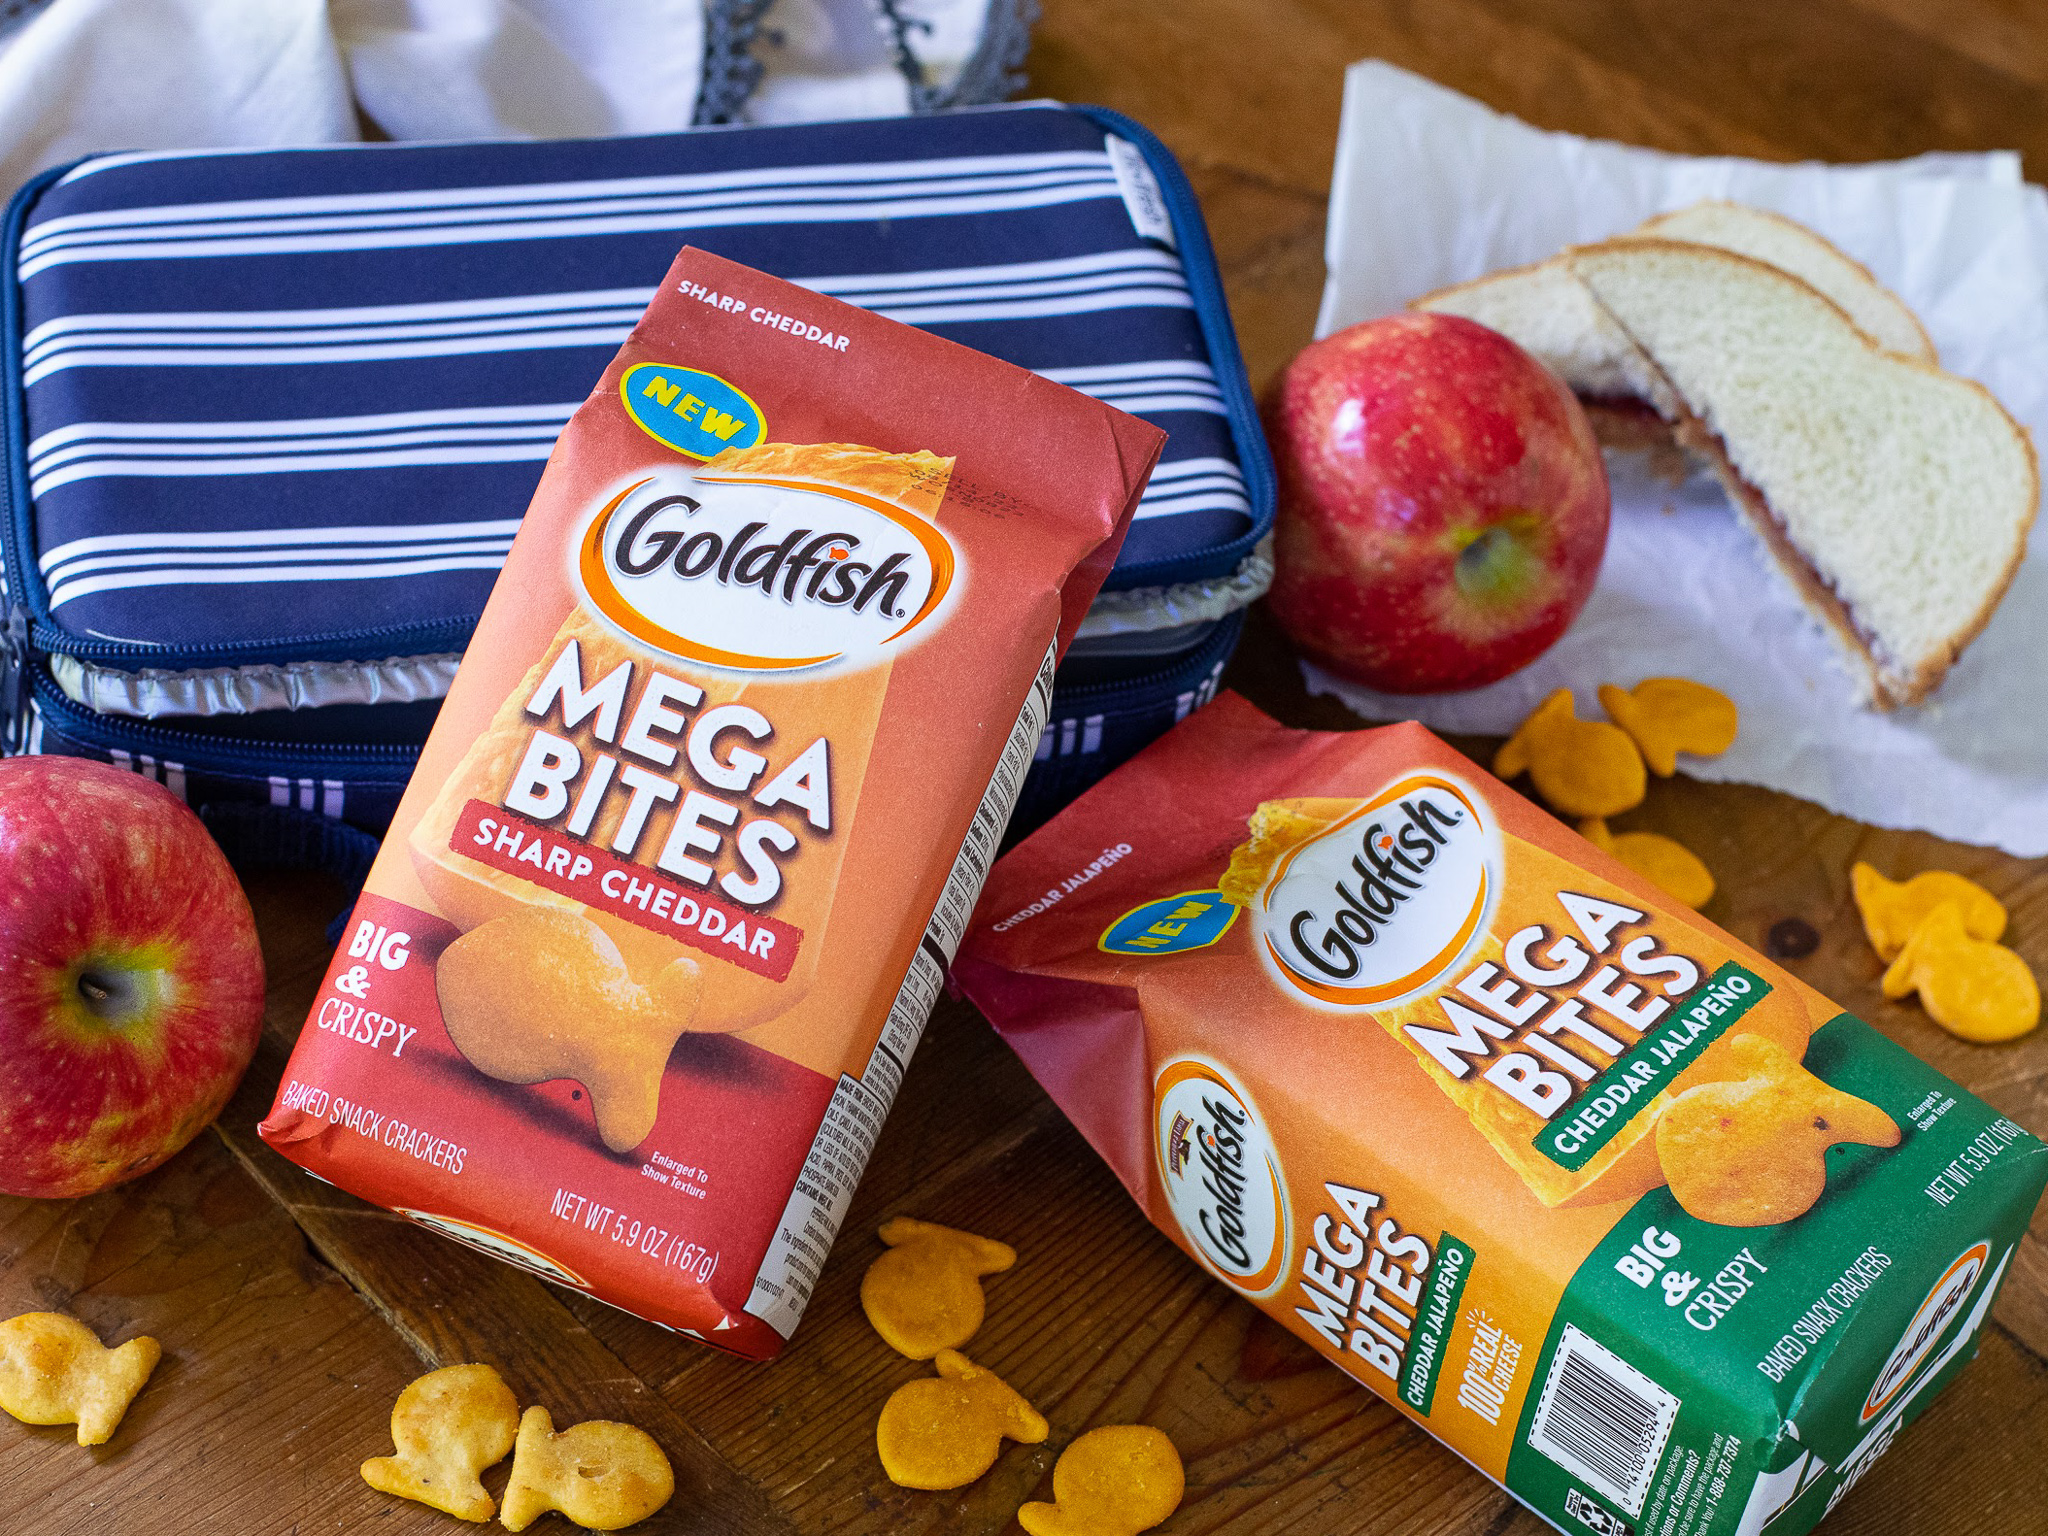 Load Your Coupon For FREE Goldfish Mega Bites® At Publix - Clip Today ONLY! on I Heart Publix